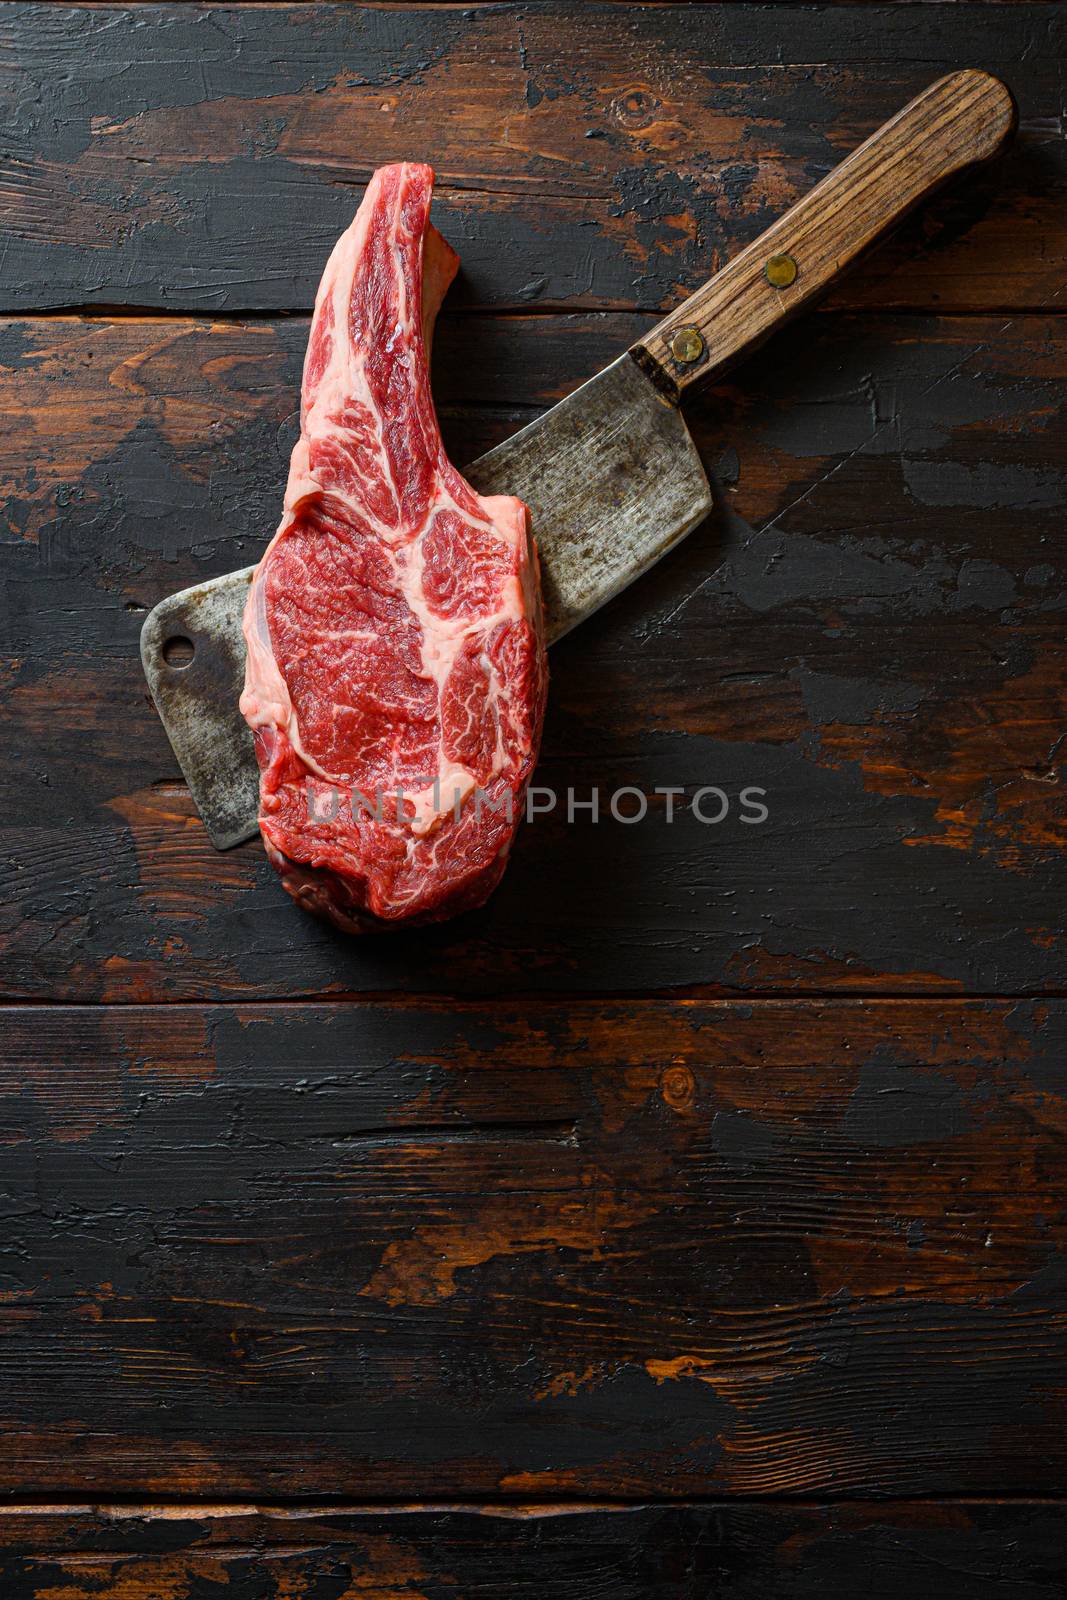 Raw Scotch Fillet steak on meat cleaver. Organic beef. Dark wooden background. Top view. Copy space.